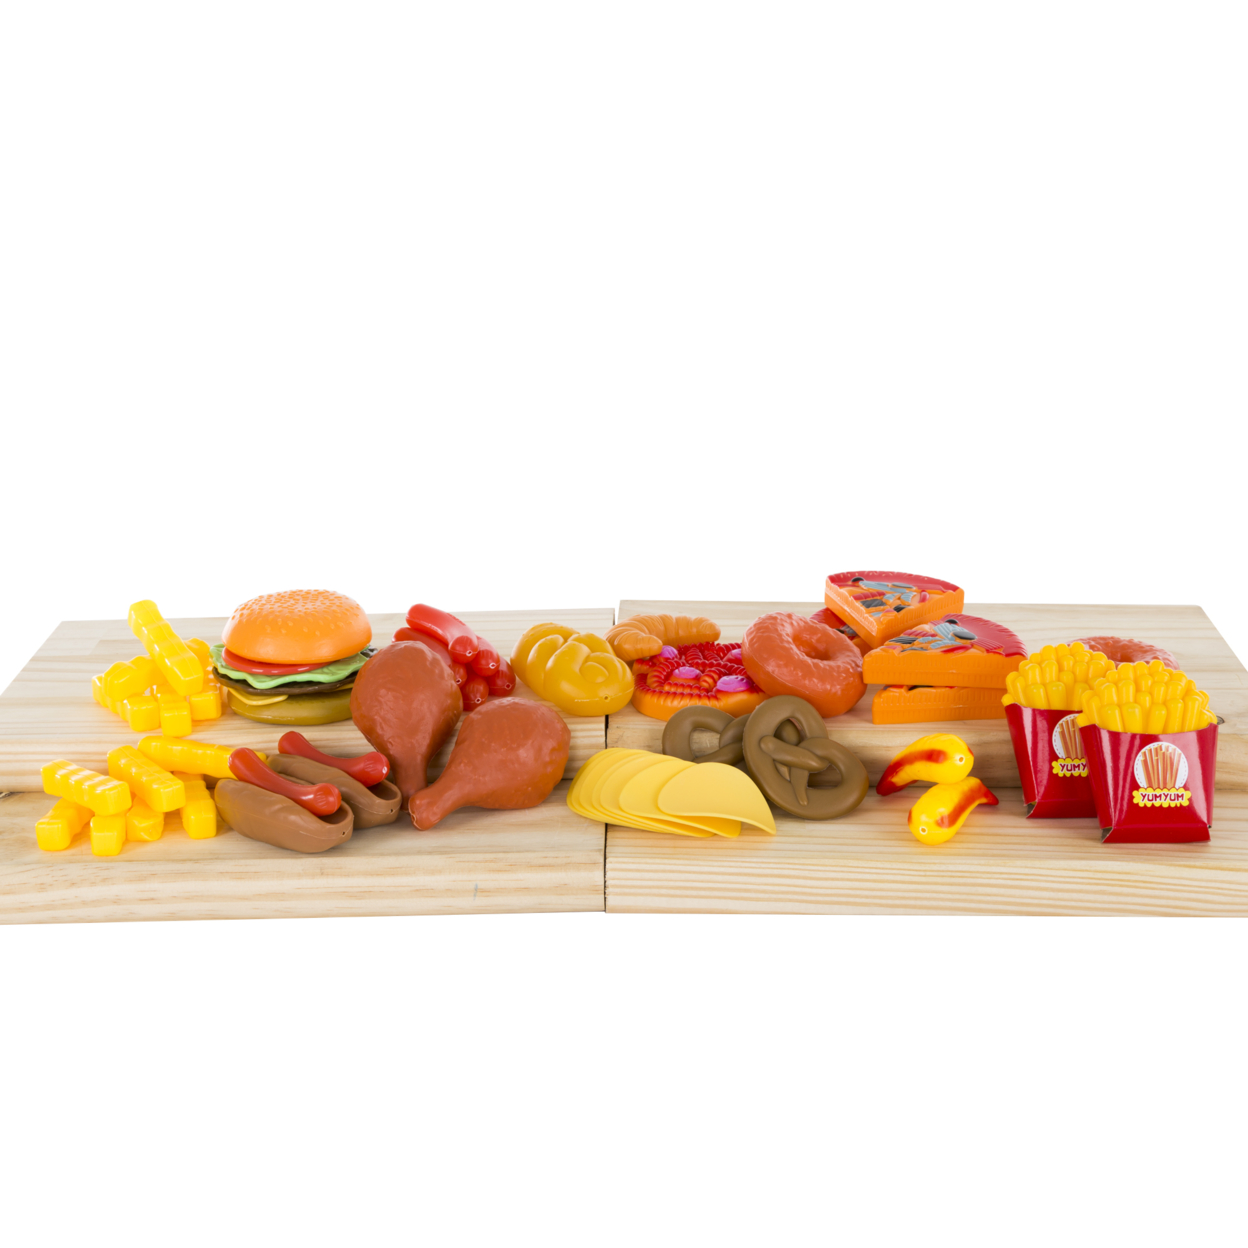 Pretend Grocery Play Assorted Food Set Boxed Fresh And Canned Store Items